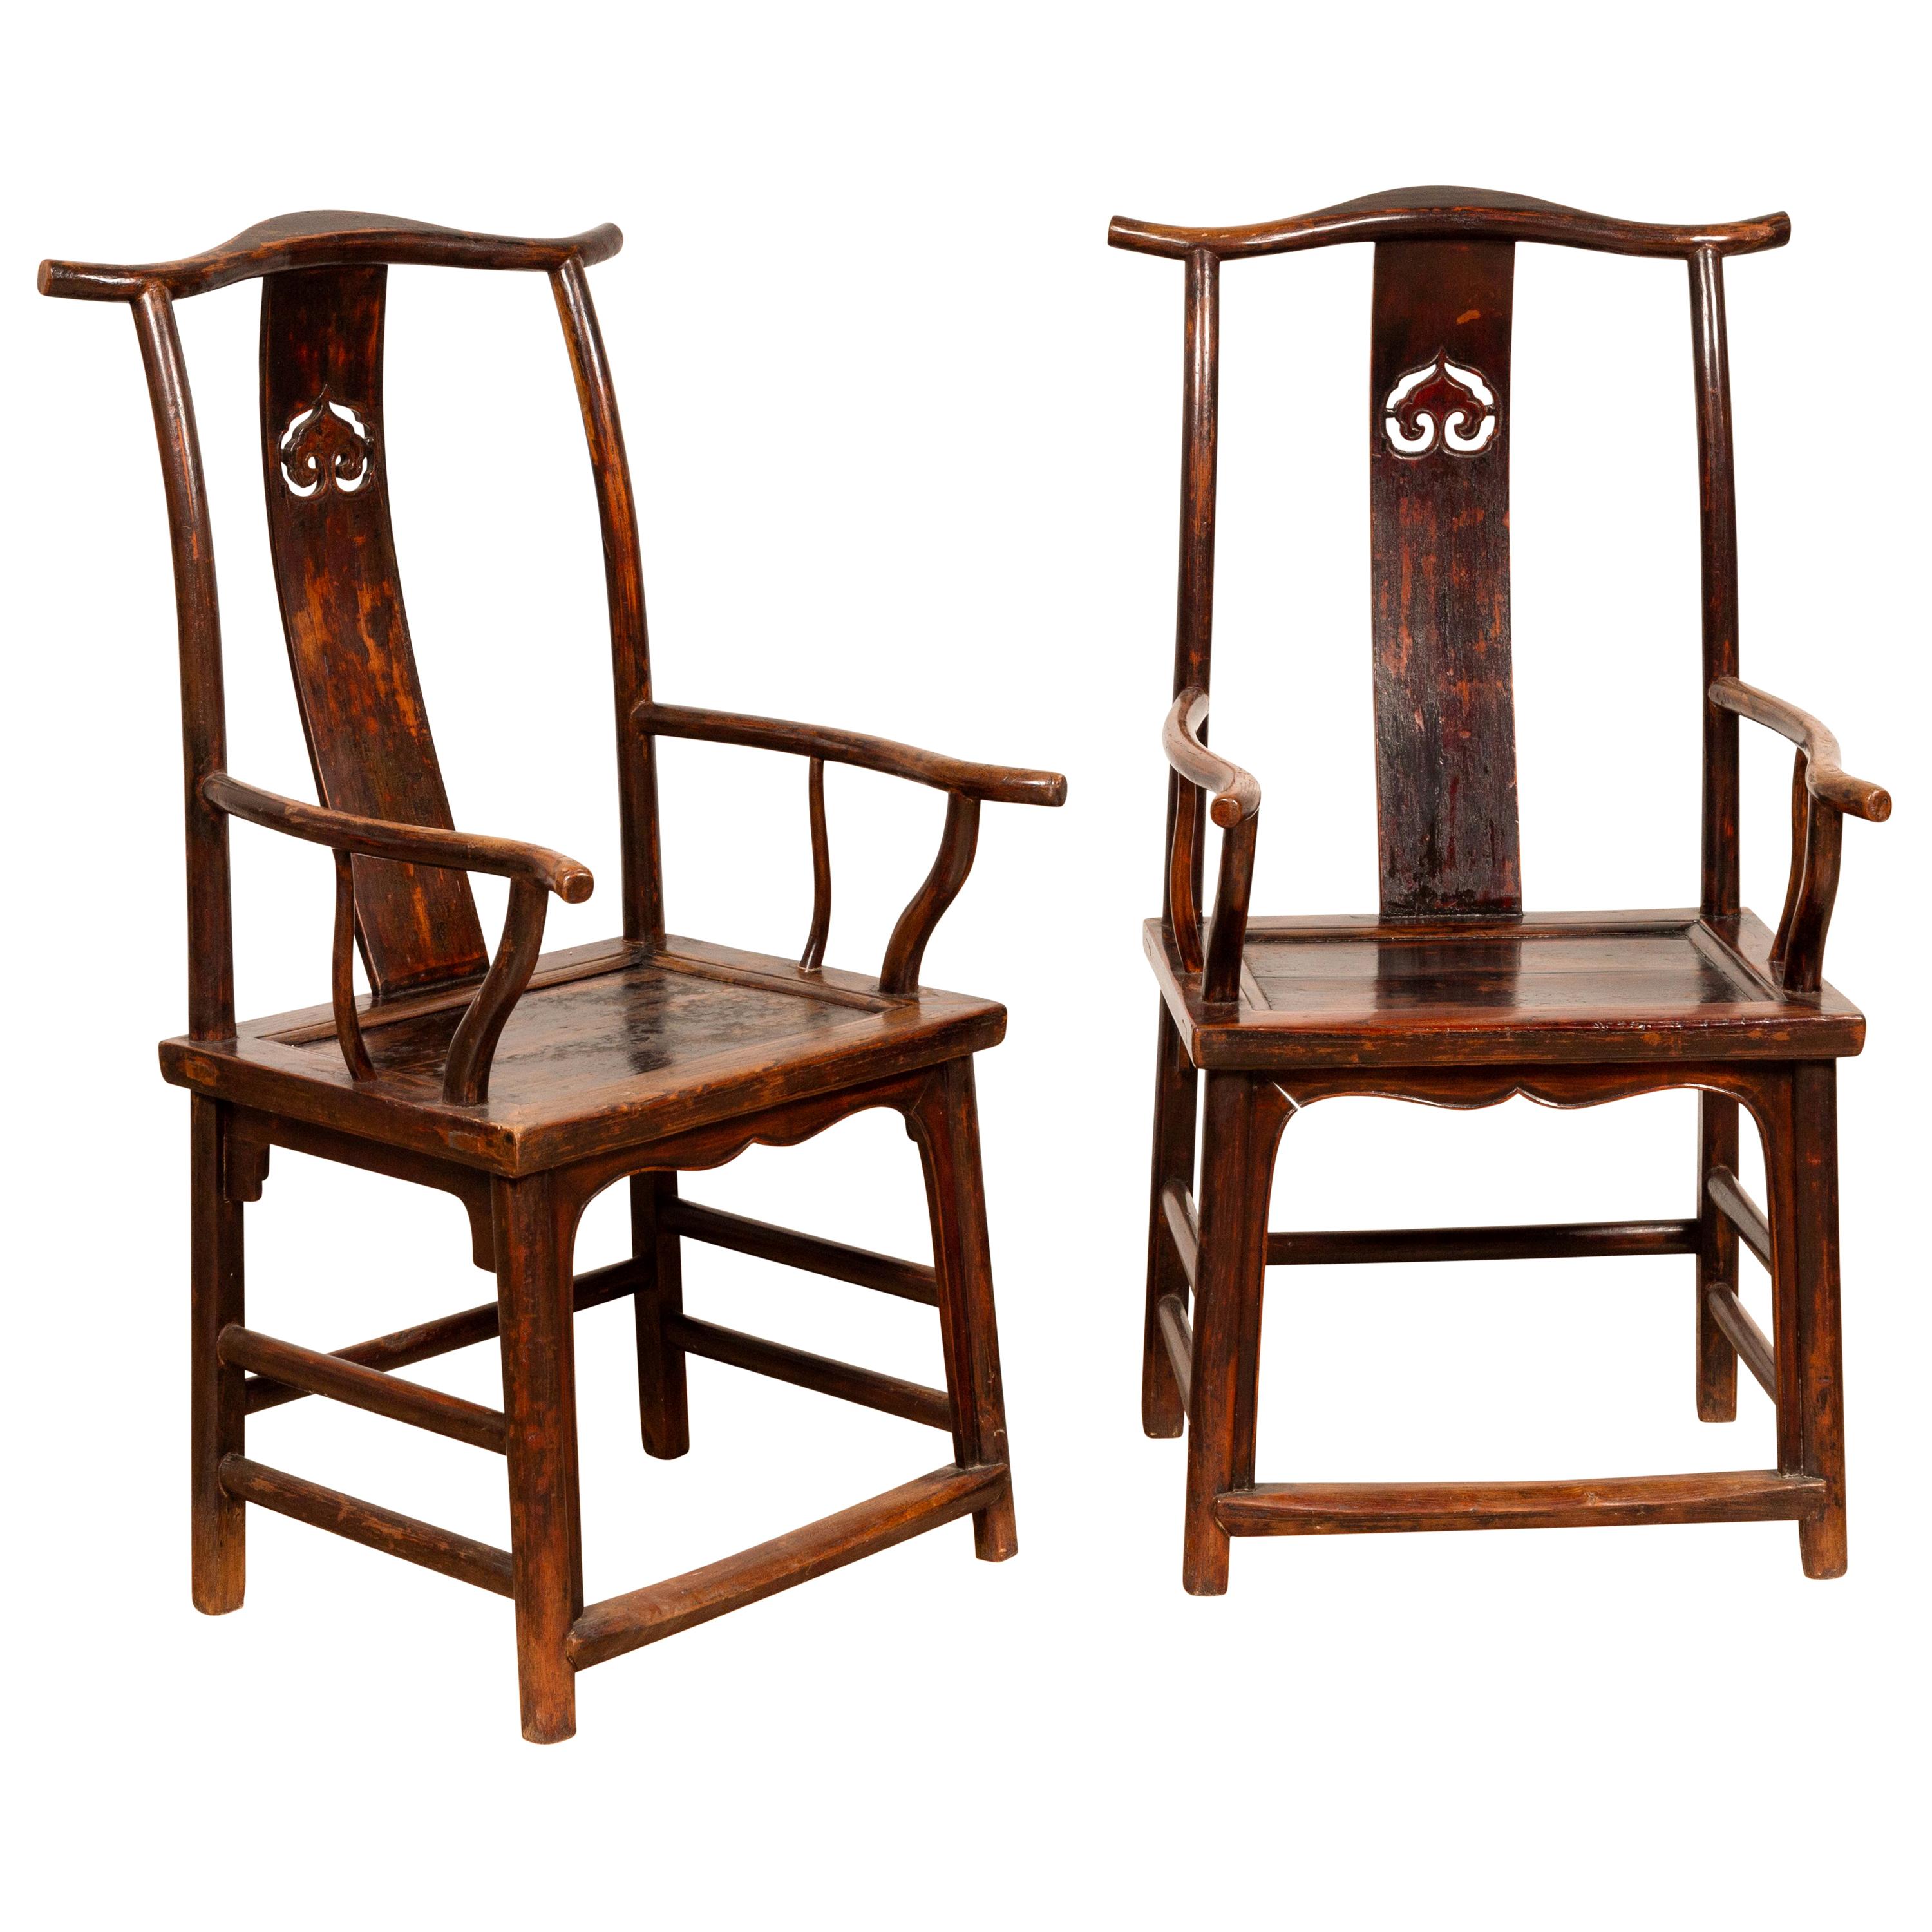 Pair of Chinese 1880s Official's Hat Chairs with Pierced Splats and Curving Arms For Sale